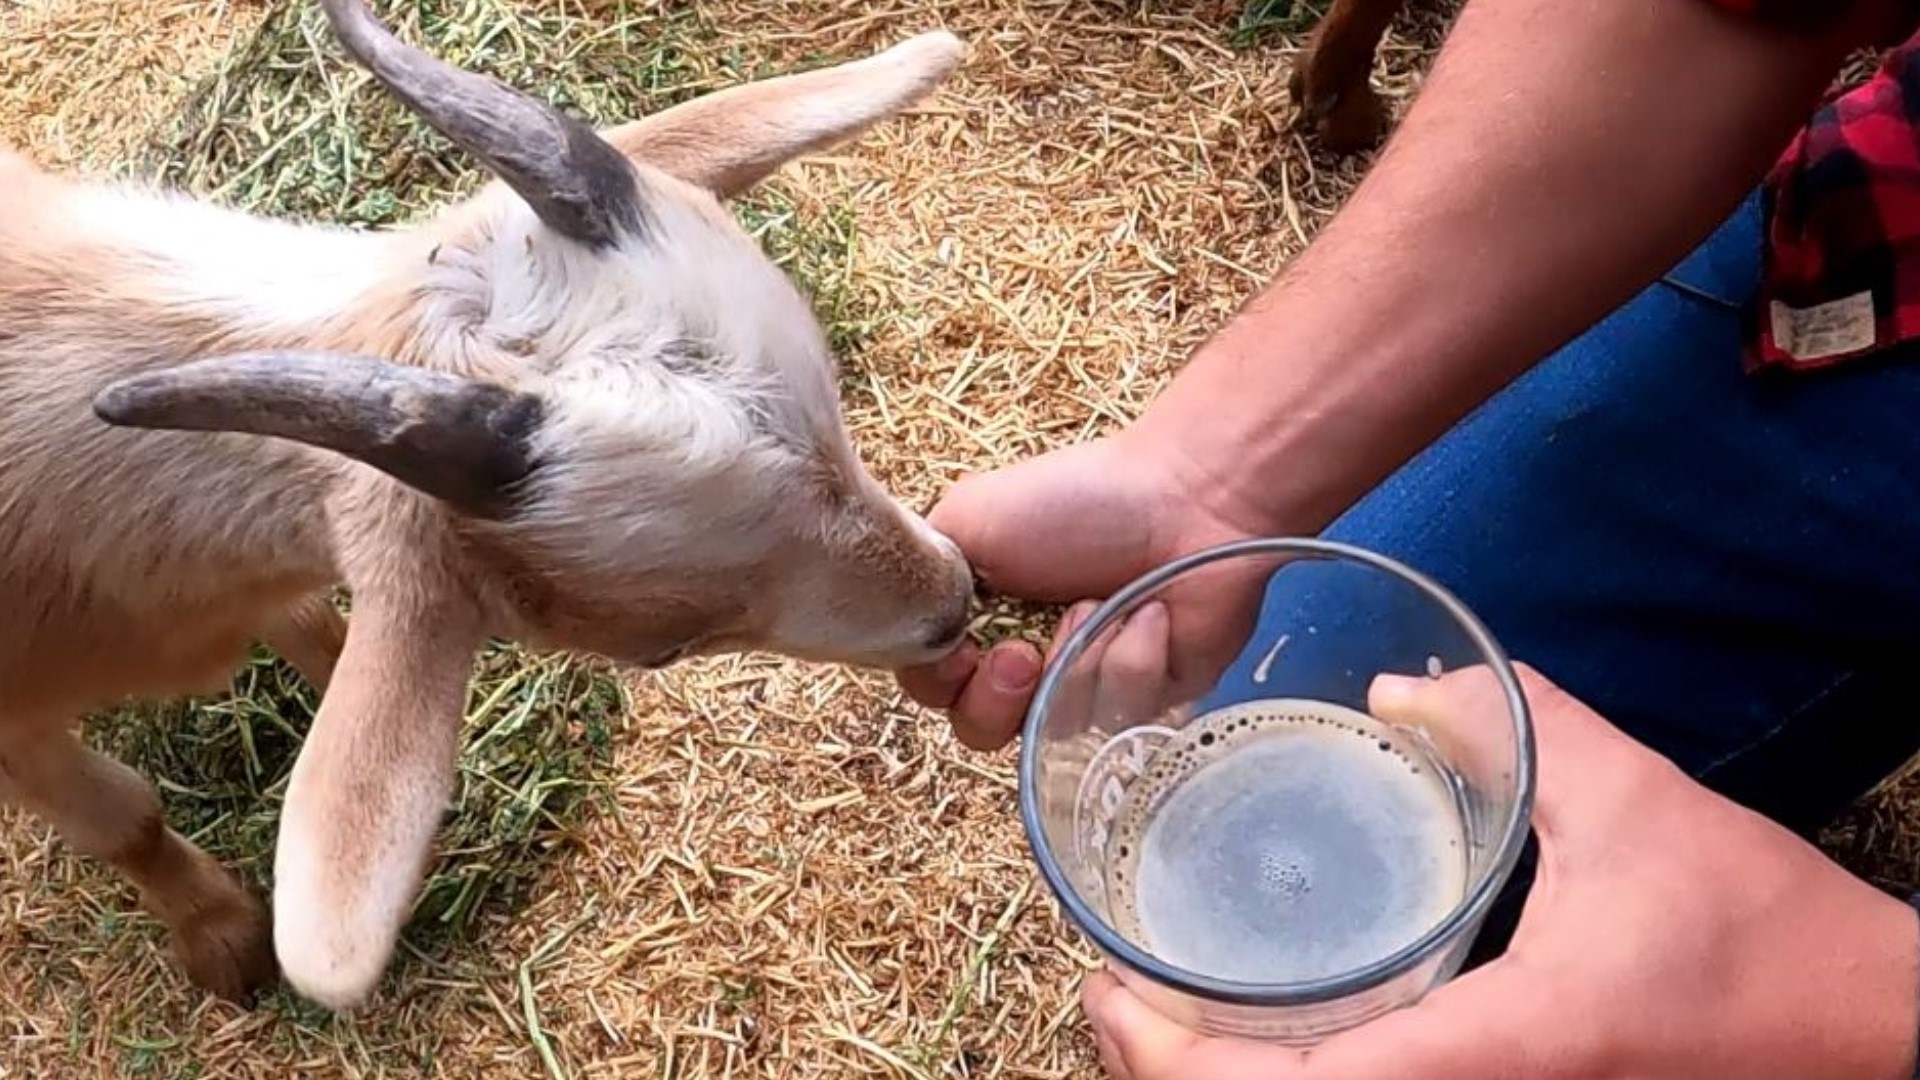 Yoked Farmhouse & Brewery wants your kids to meet their kids — baby goats. #k5evening